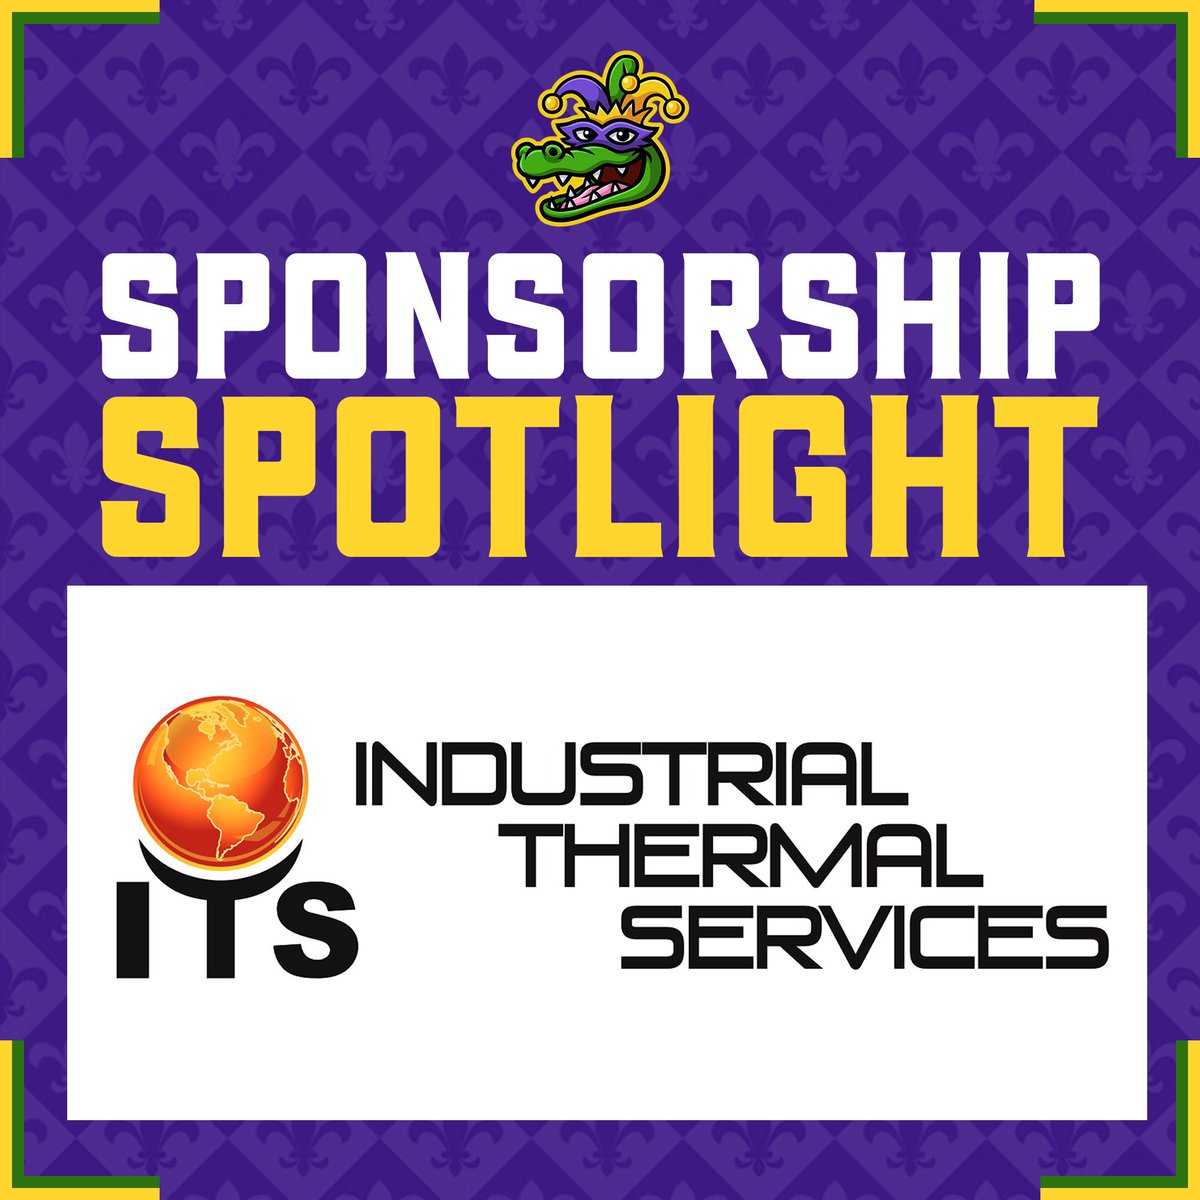 Thank you to ITS (Industrial Thermal Services) for sponsoring the Gumbeaux Gators! 🐊⚾️

#gumbeauxgators #geauxgators